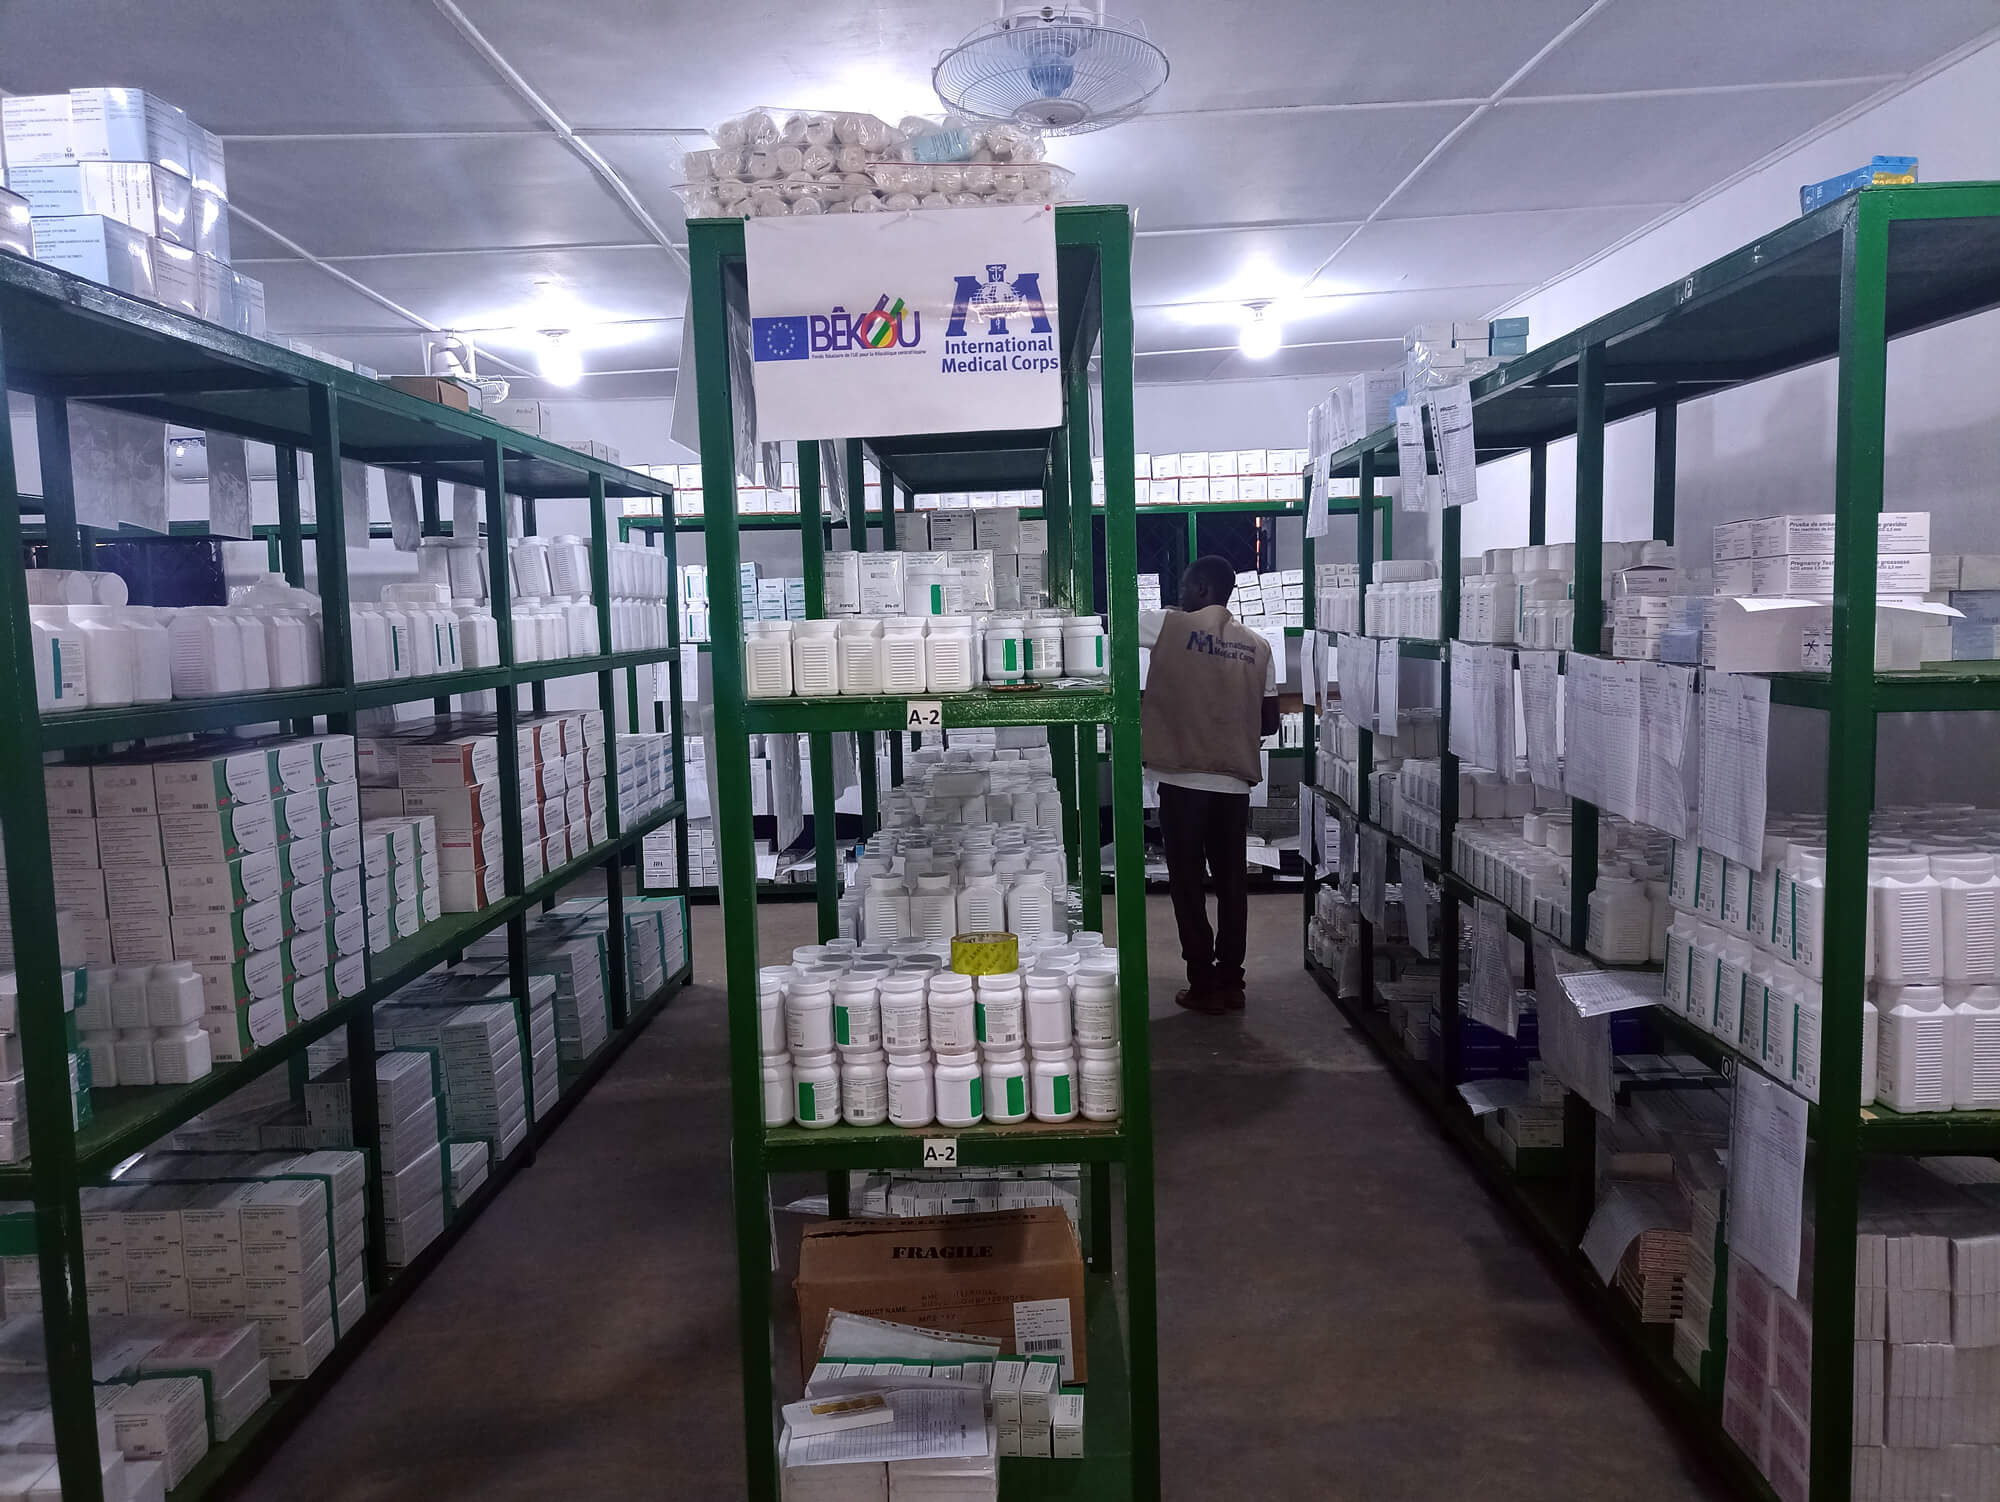 Central African Republic's Bria District Pharmacy, which International Medical Corps rehabilitated and organized, has benefited from MEDCOM.